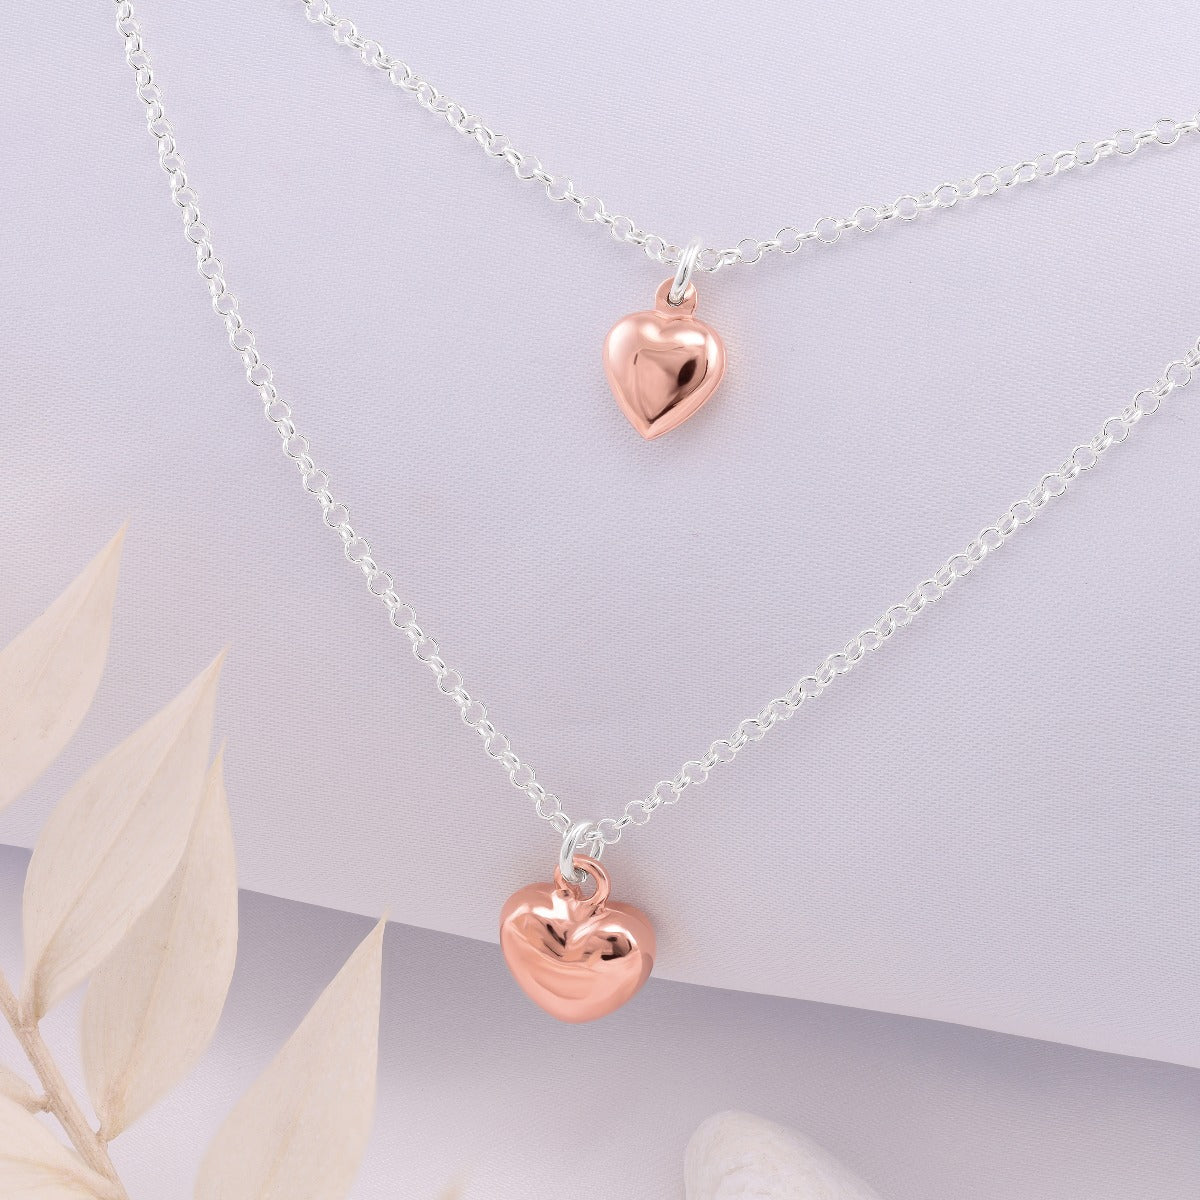 925 Sterling Silver & Rose Gold Hearts Necklace 16"+ 2" - FJewellery